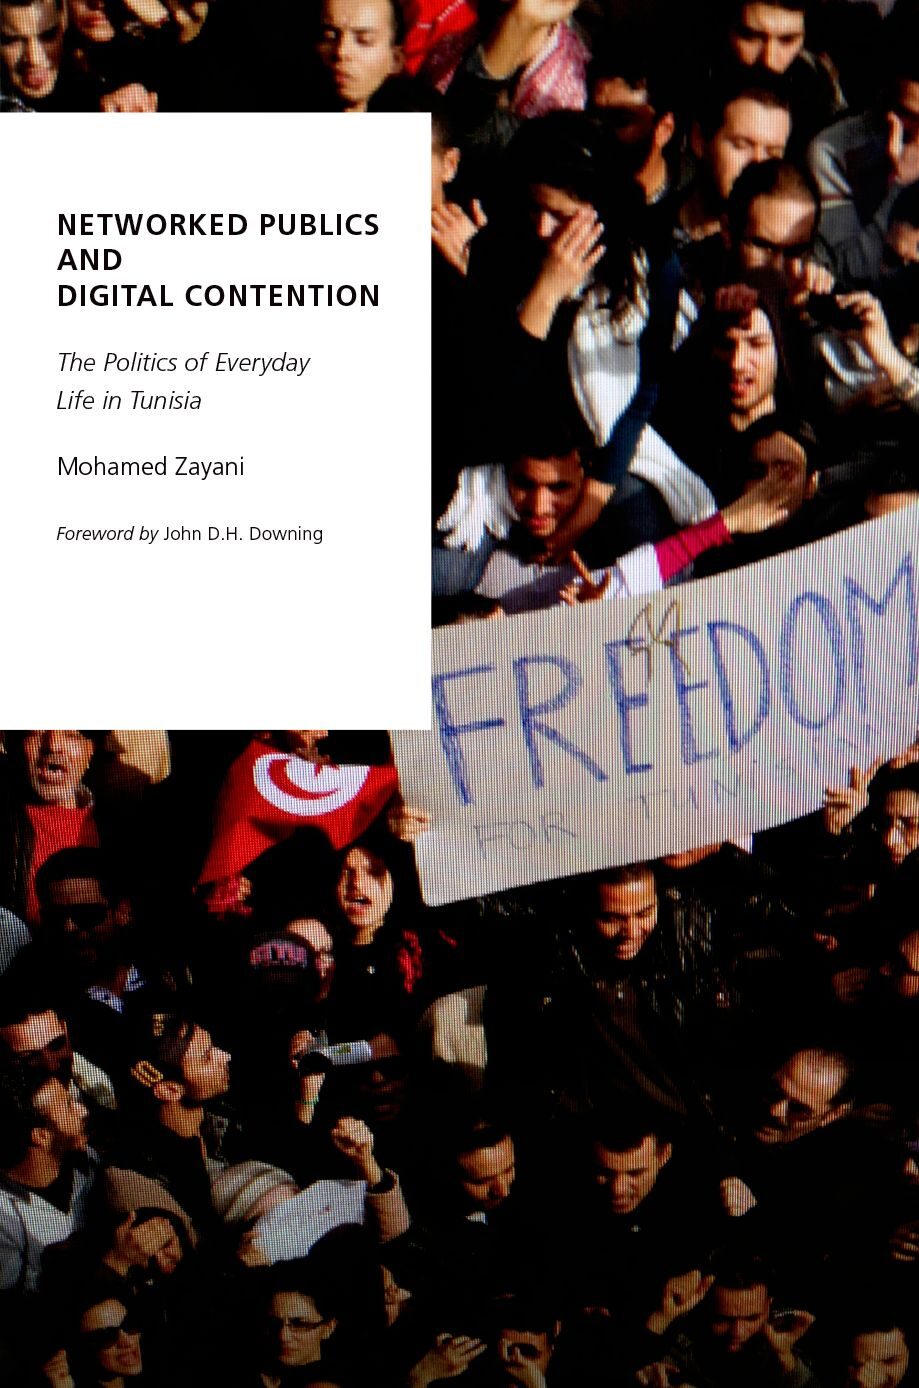 Networked Publics and Digital Contention: The Politics of Everyday Life in Tunisia